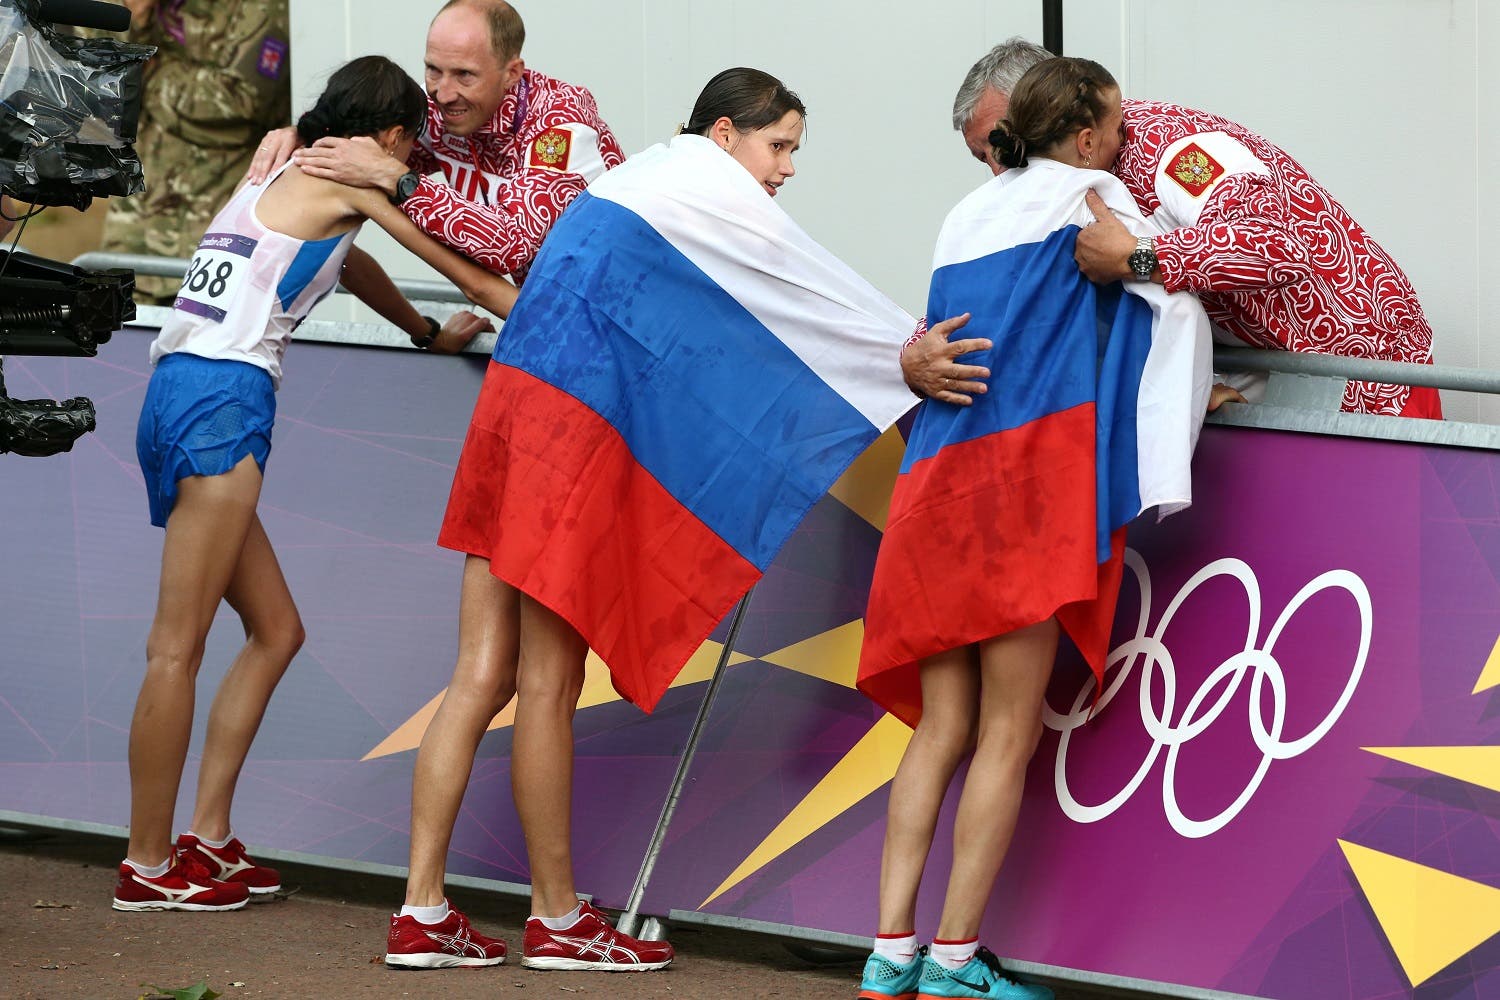  In this Aug. 11, 2012 file photo Russia coach Alexey Melnikov congratulates Olga Kaniskina, right, and Russia men's gold medalist Sergey Kirdyapkin congratulates Anisya Kirdyapkina, left, after the women's 20-kilometers race walk at the 2012 Summer Olympics in London. (AP)